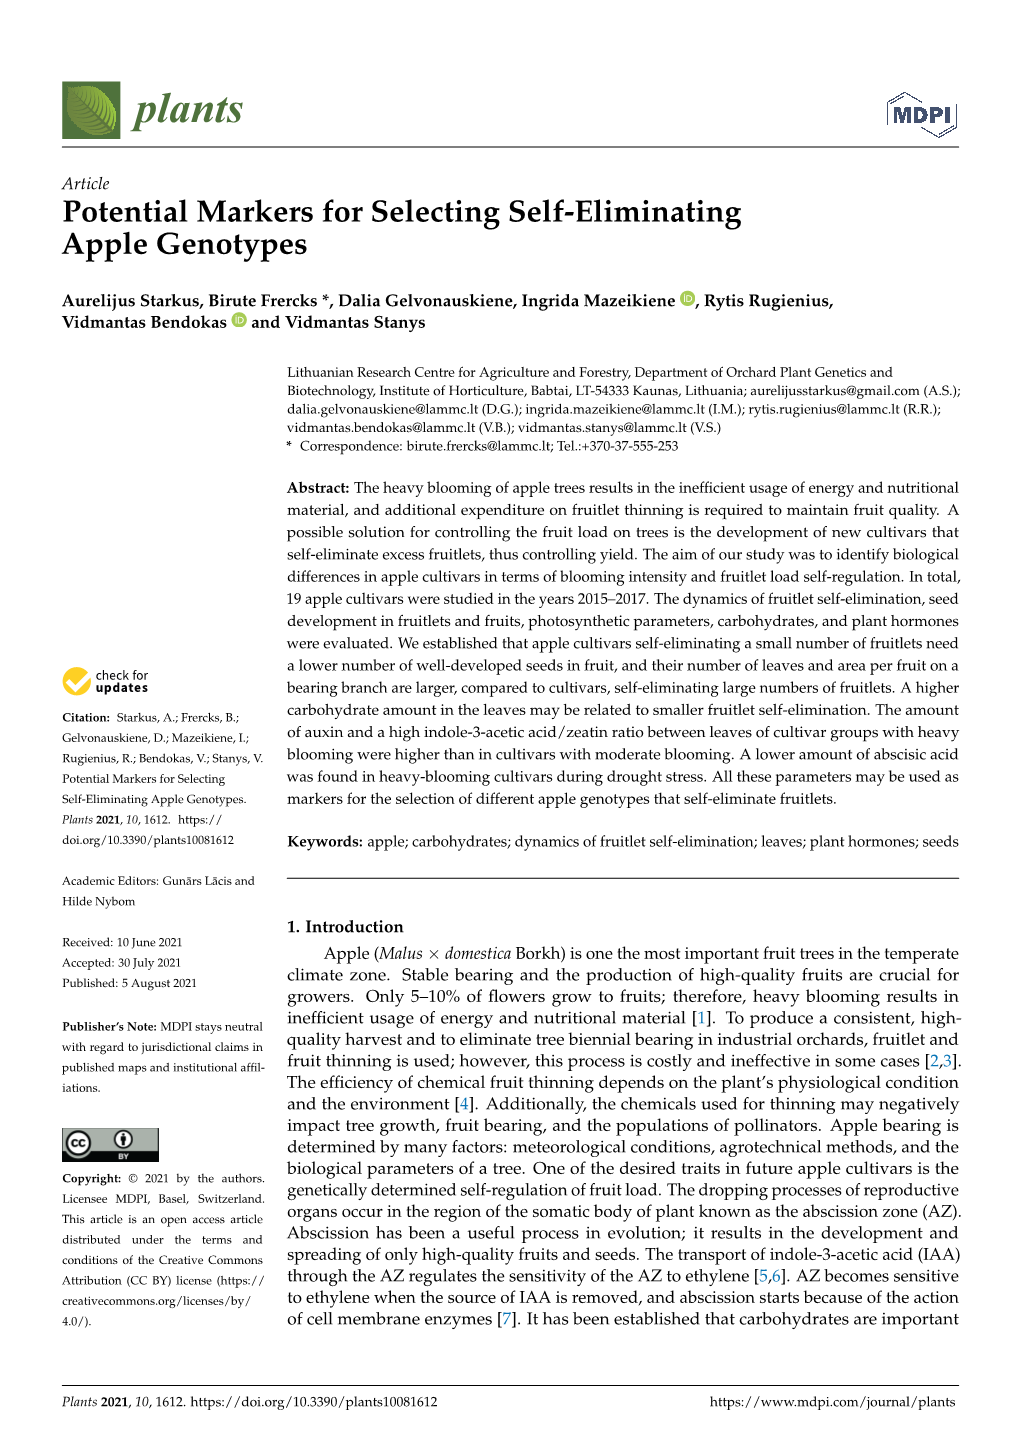 Potential Markers for Selecting Self-Eliminating Apple Genotypes